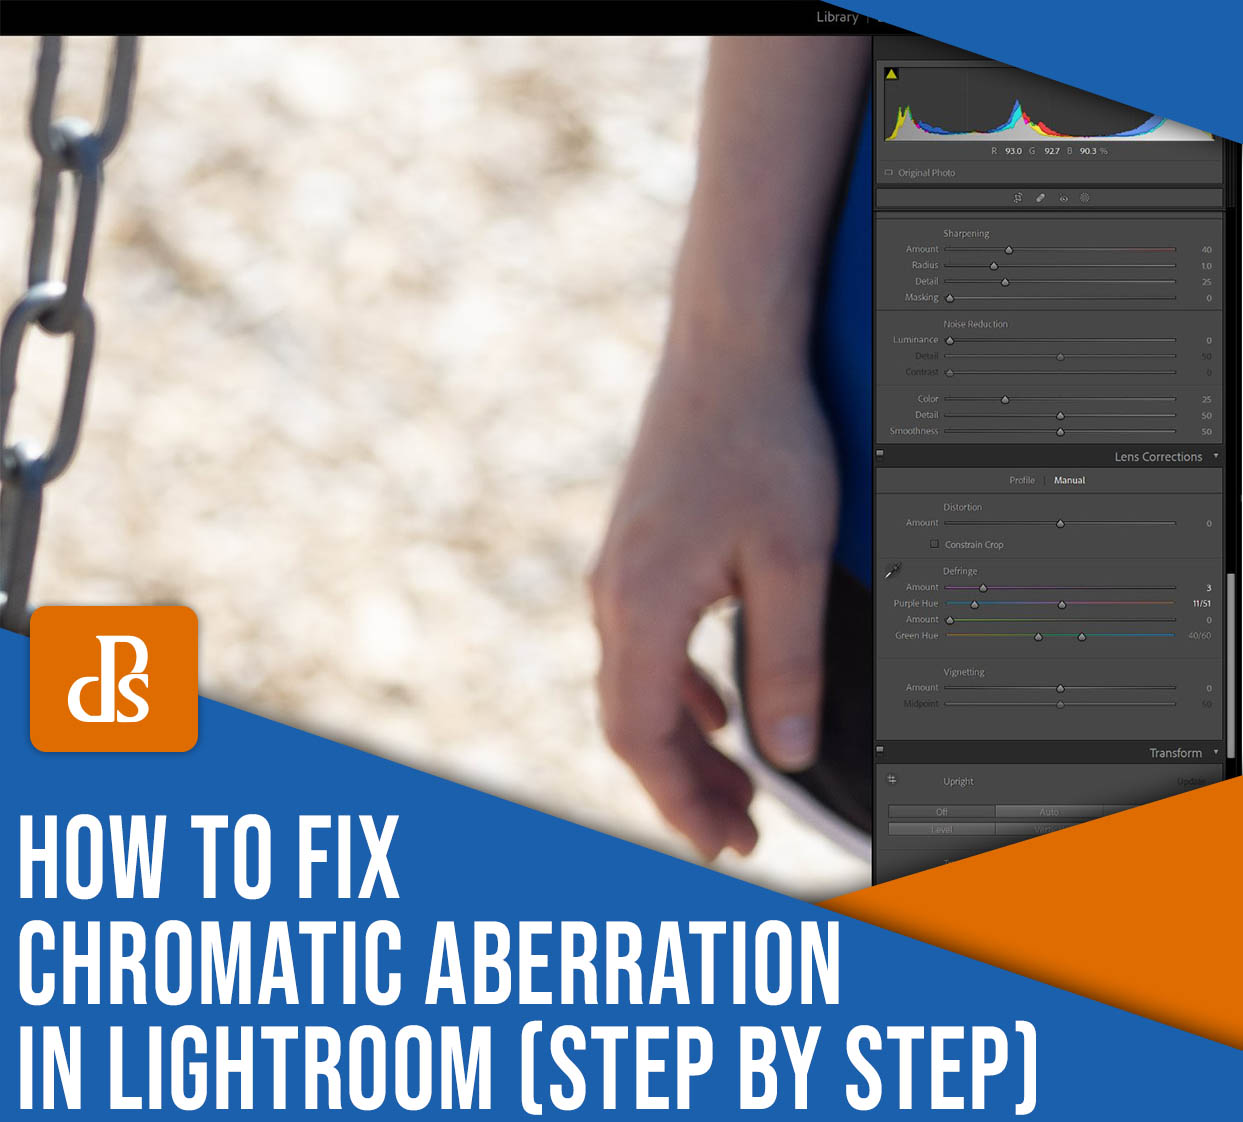 How to fix chromatic aberration in Lightroom (step by step)